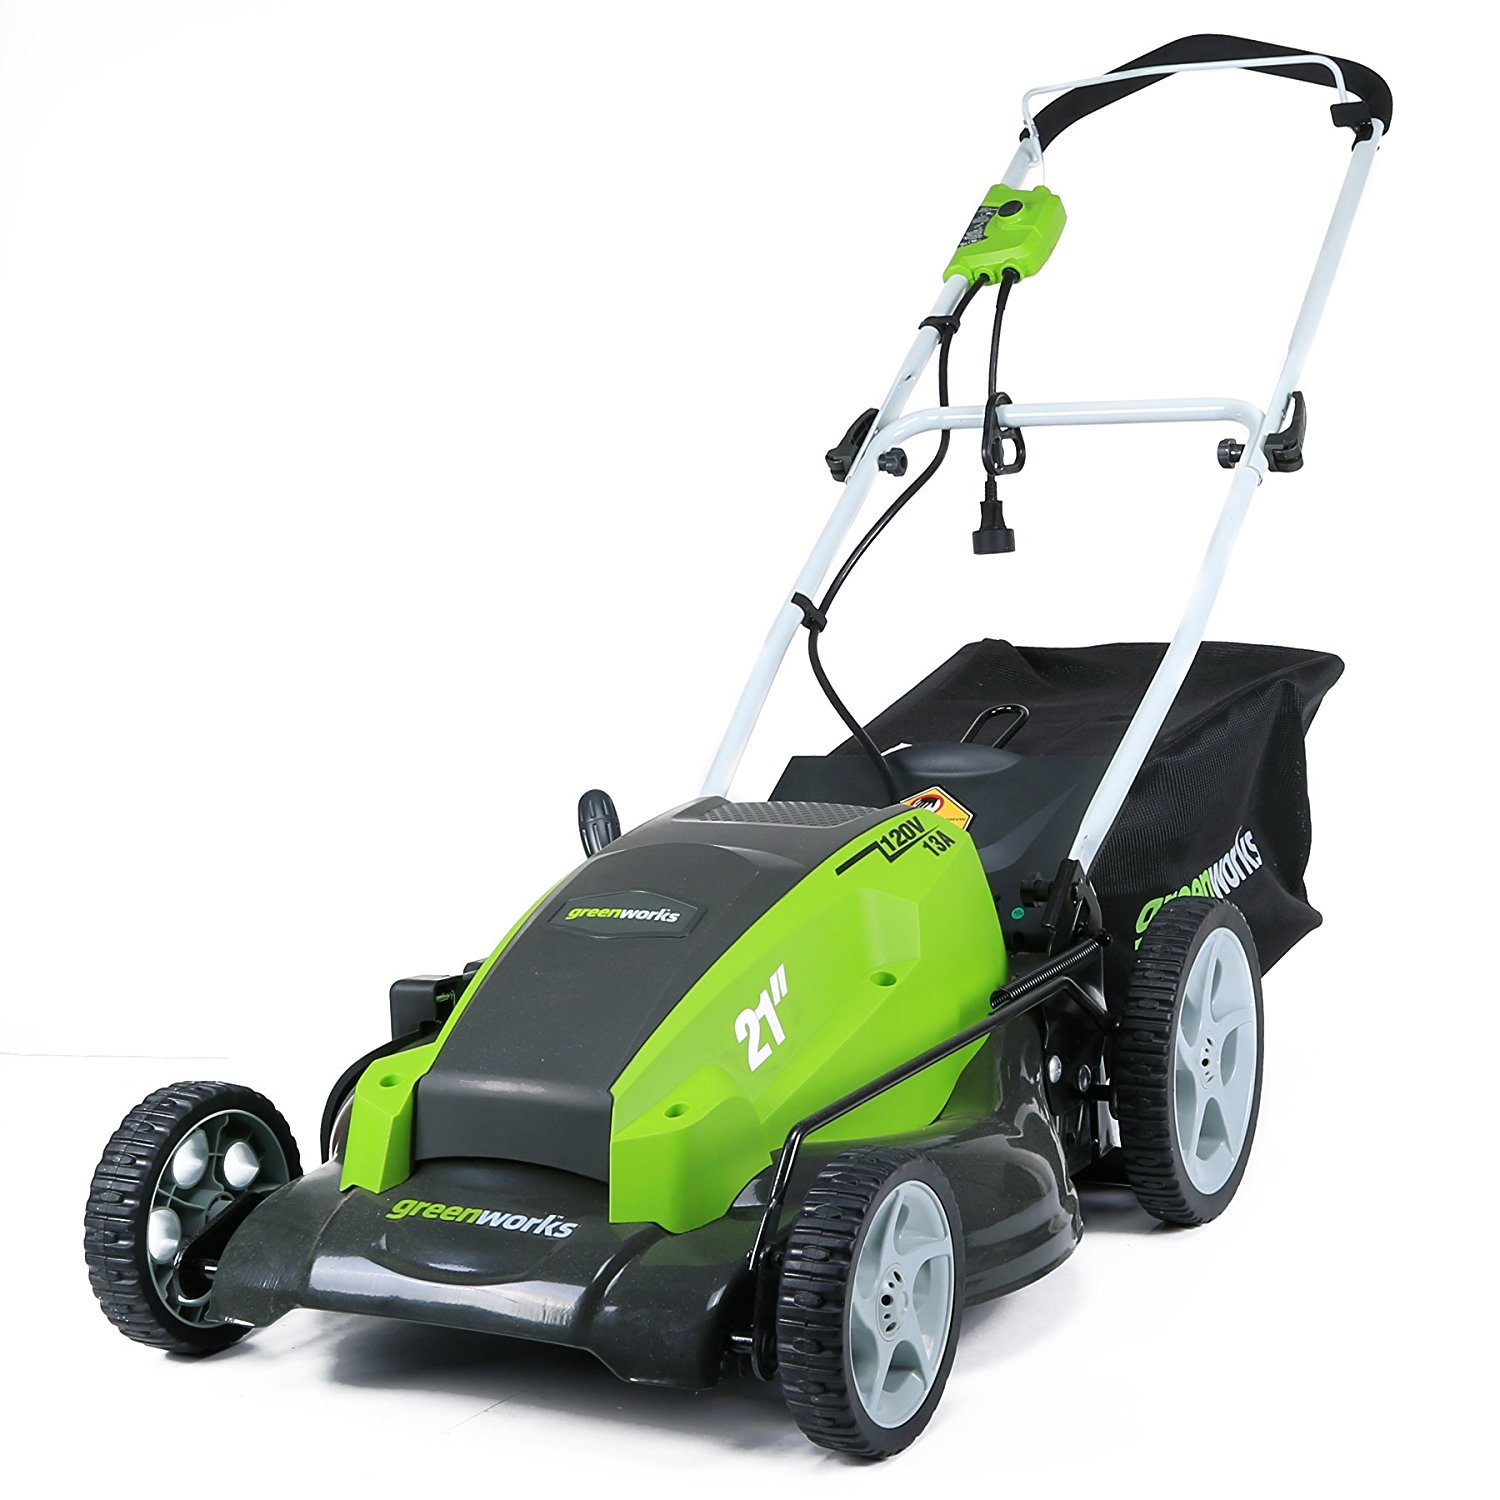 GreenWorks 13 amp 21-inch corded electric lawn mower for $100